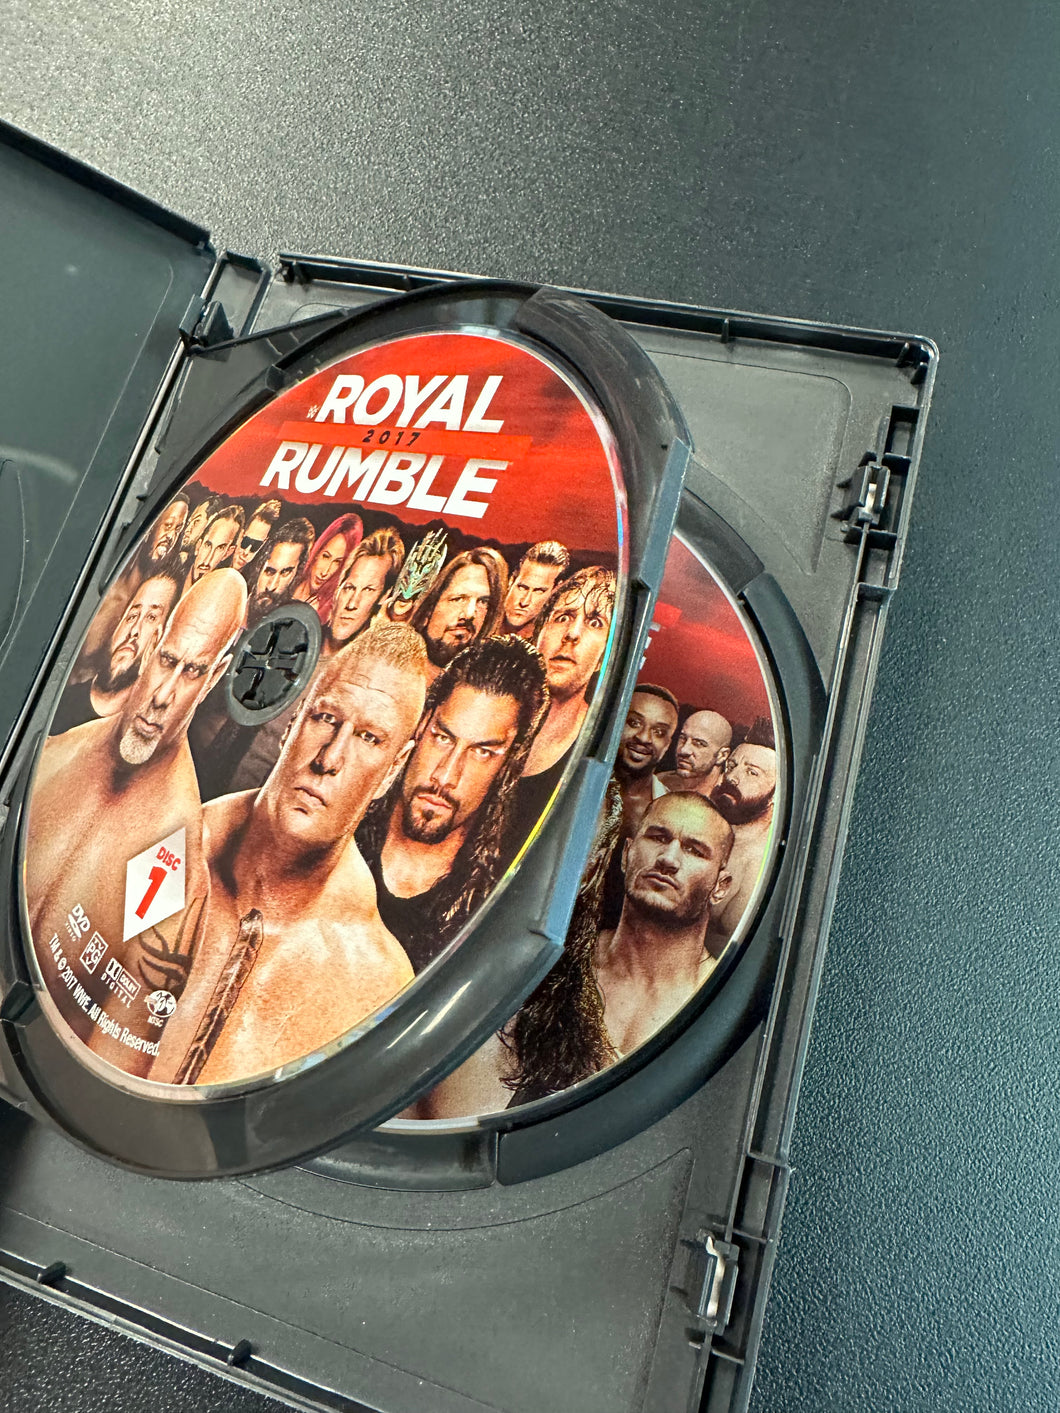 WWE Royal Rumble 2017 2 Disc Set [DVD] Preowned